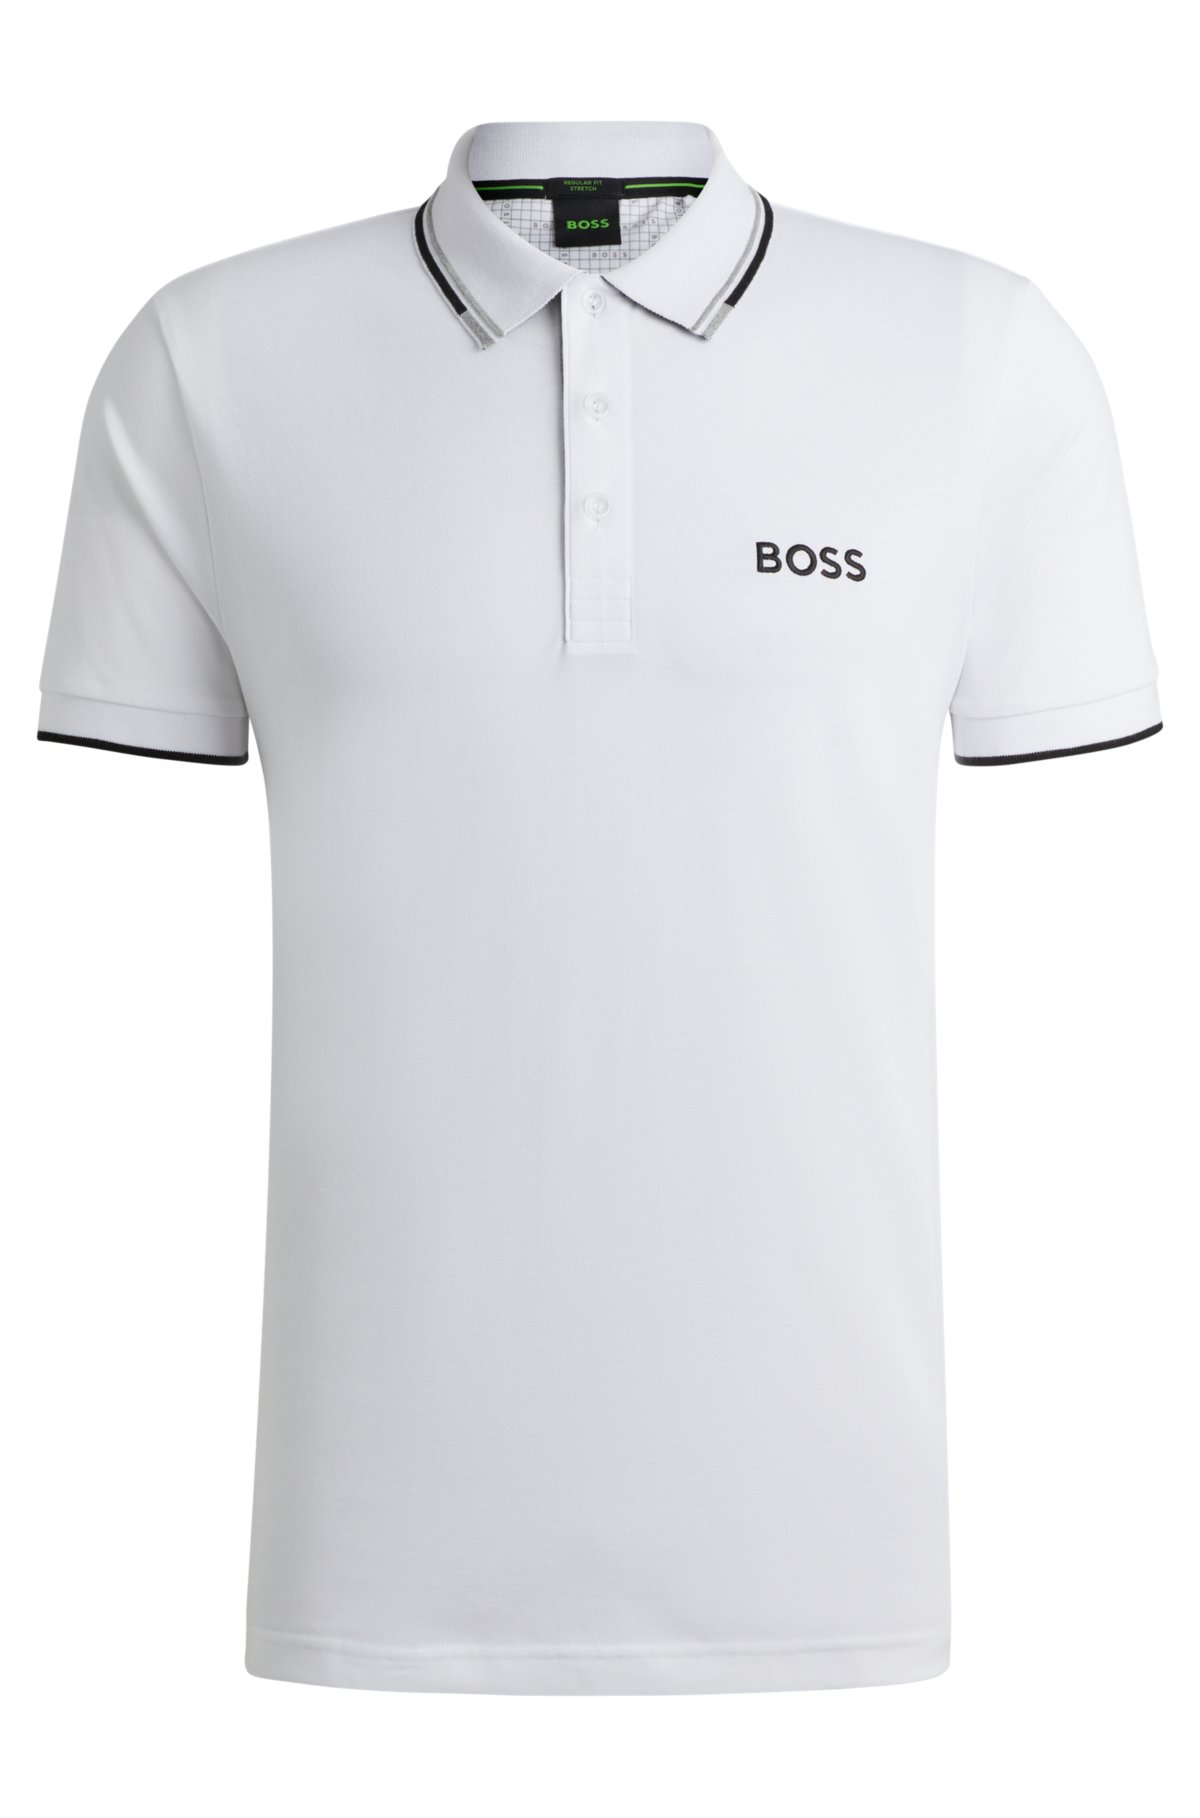 Steward Vellykket forsøg BOSS - Polo shirt with contrast logos